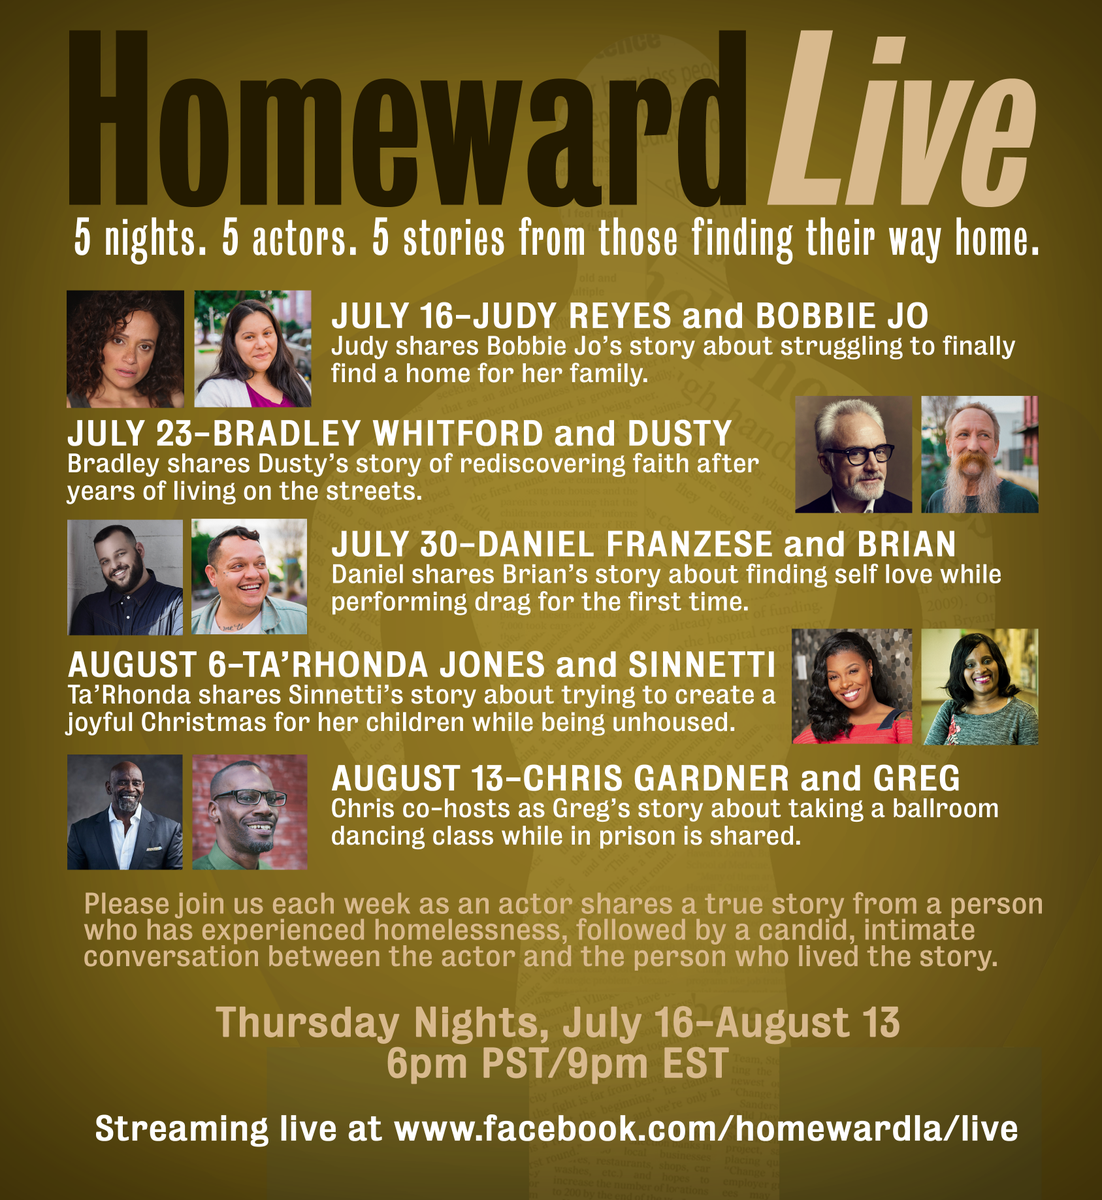 Join us for Homeward Live. Every Thursday from July 16 to August 13 at 6pm PT/9pm ET, a celebrity actor will perform a story from a person who has been homeless, followed by a conversation between the actor and the real person. Streaming at facebook.com/homewardla/live